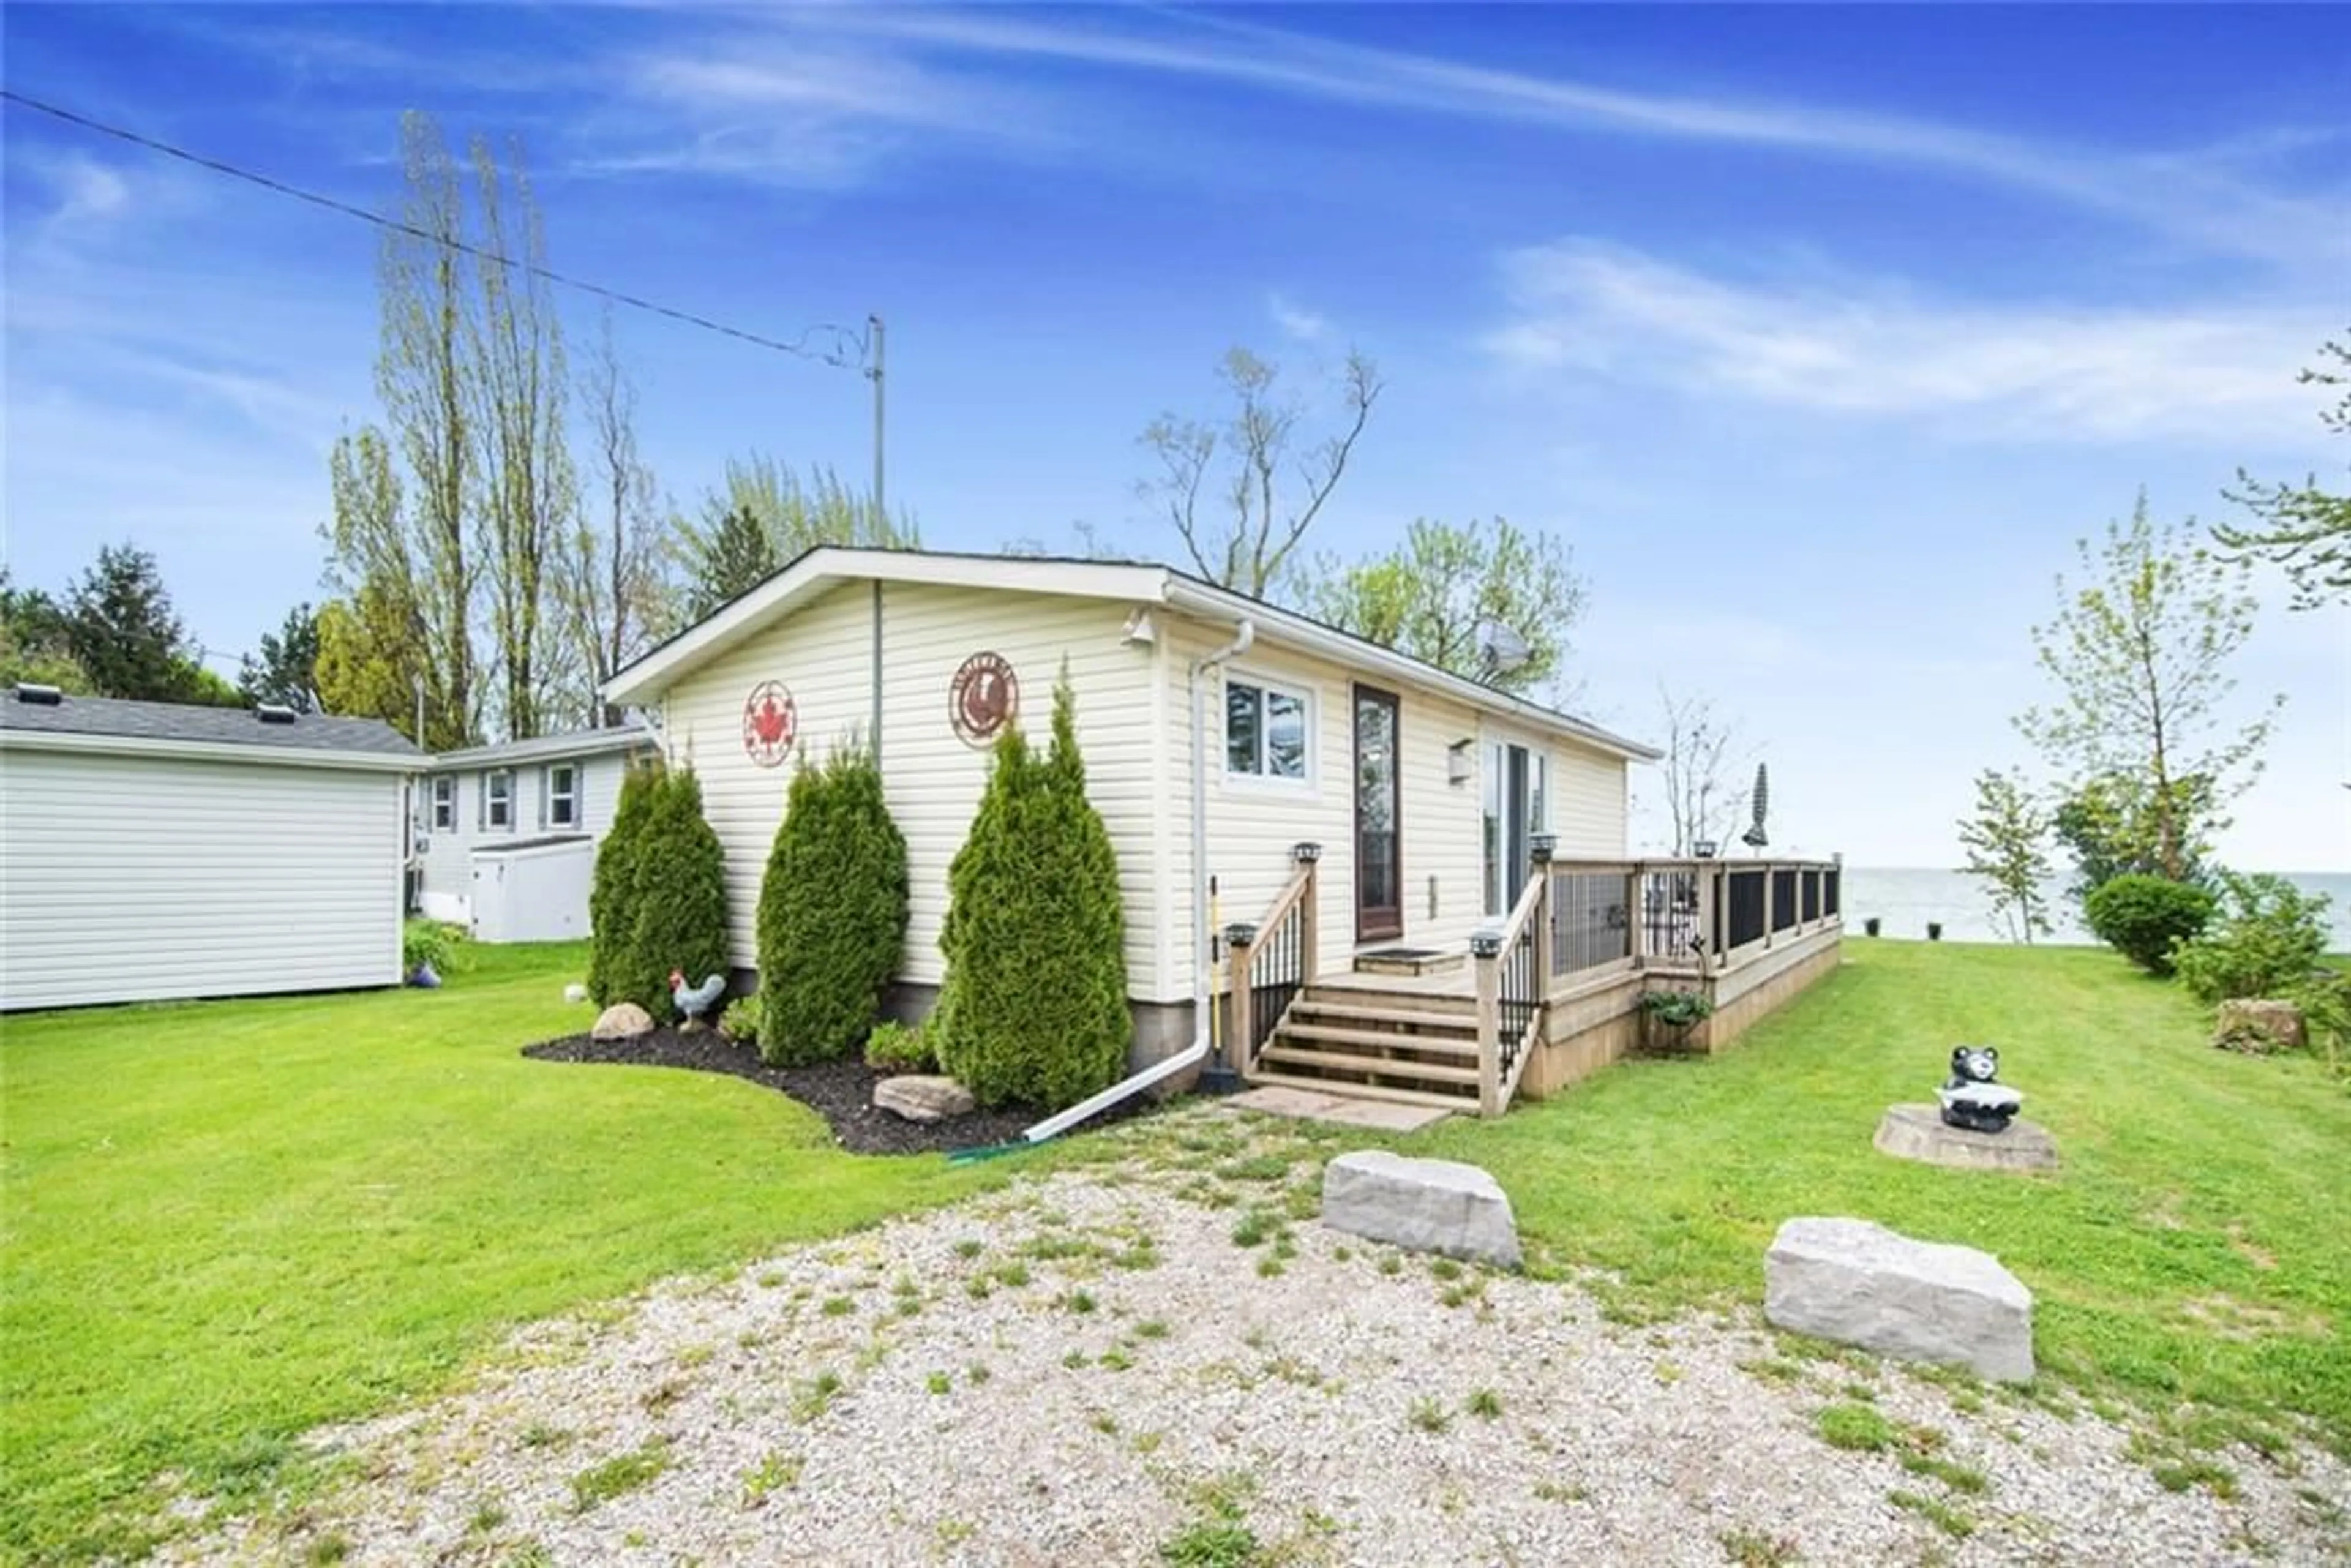 Cottage for 34 Warnick Rd, Dunnville Ontario N0A 1K0